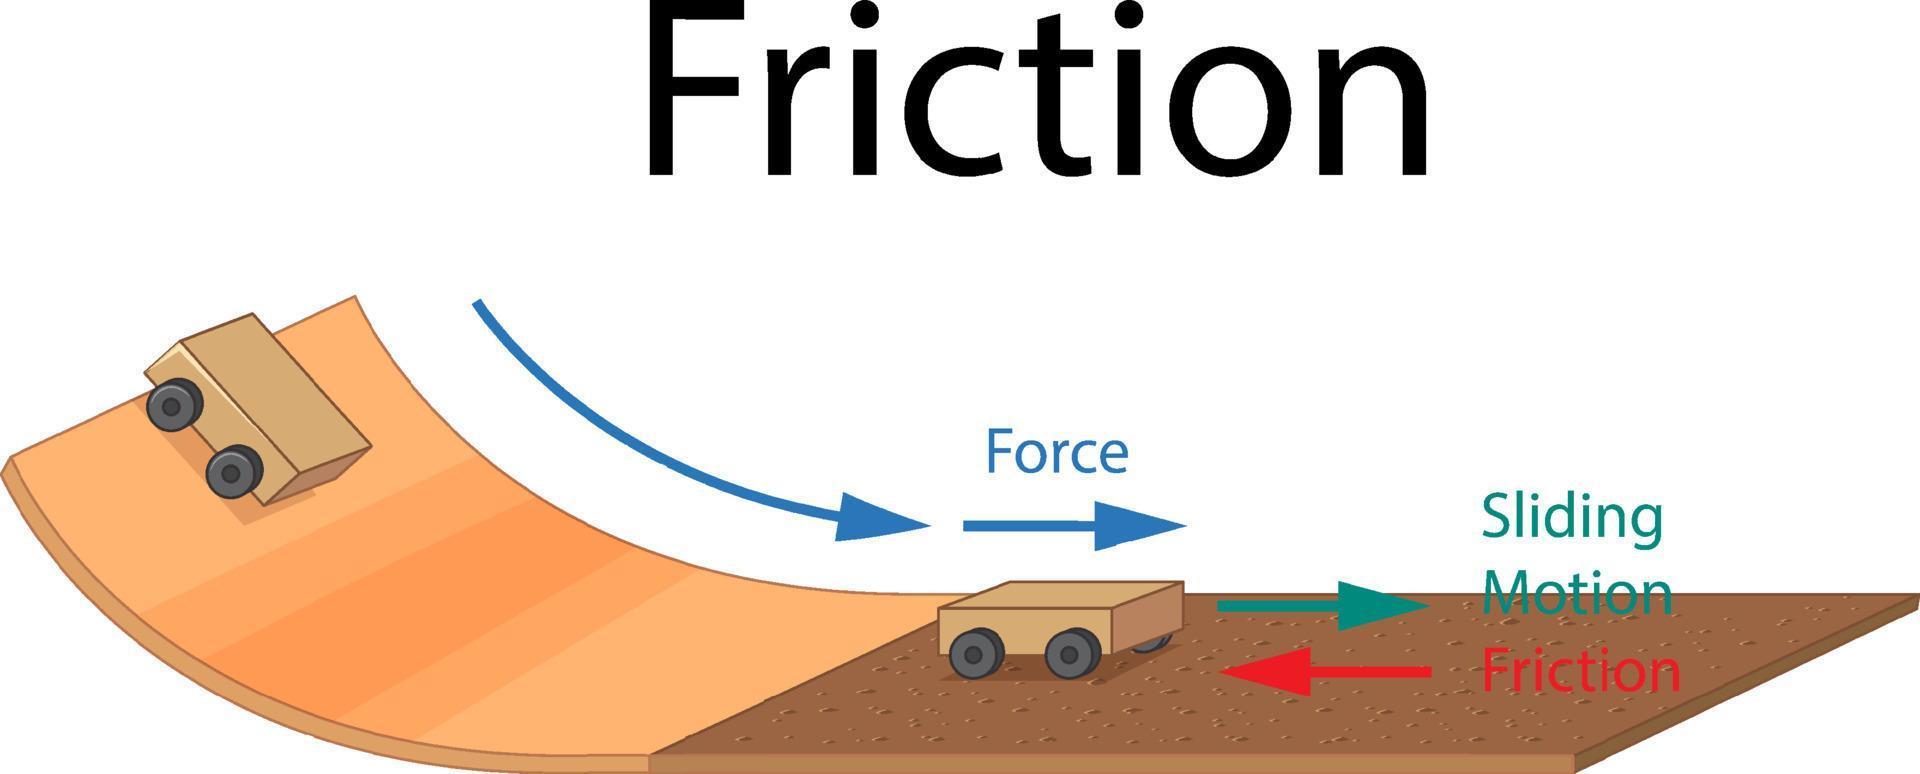 Example of friction experiment vector